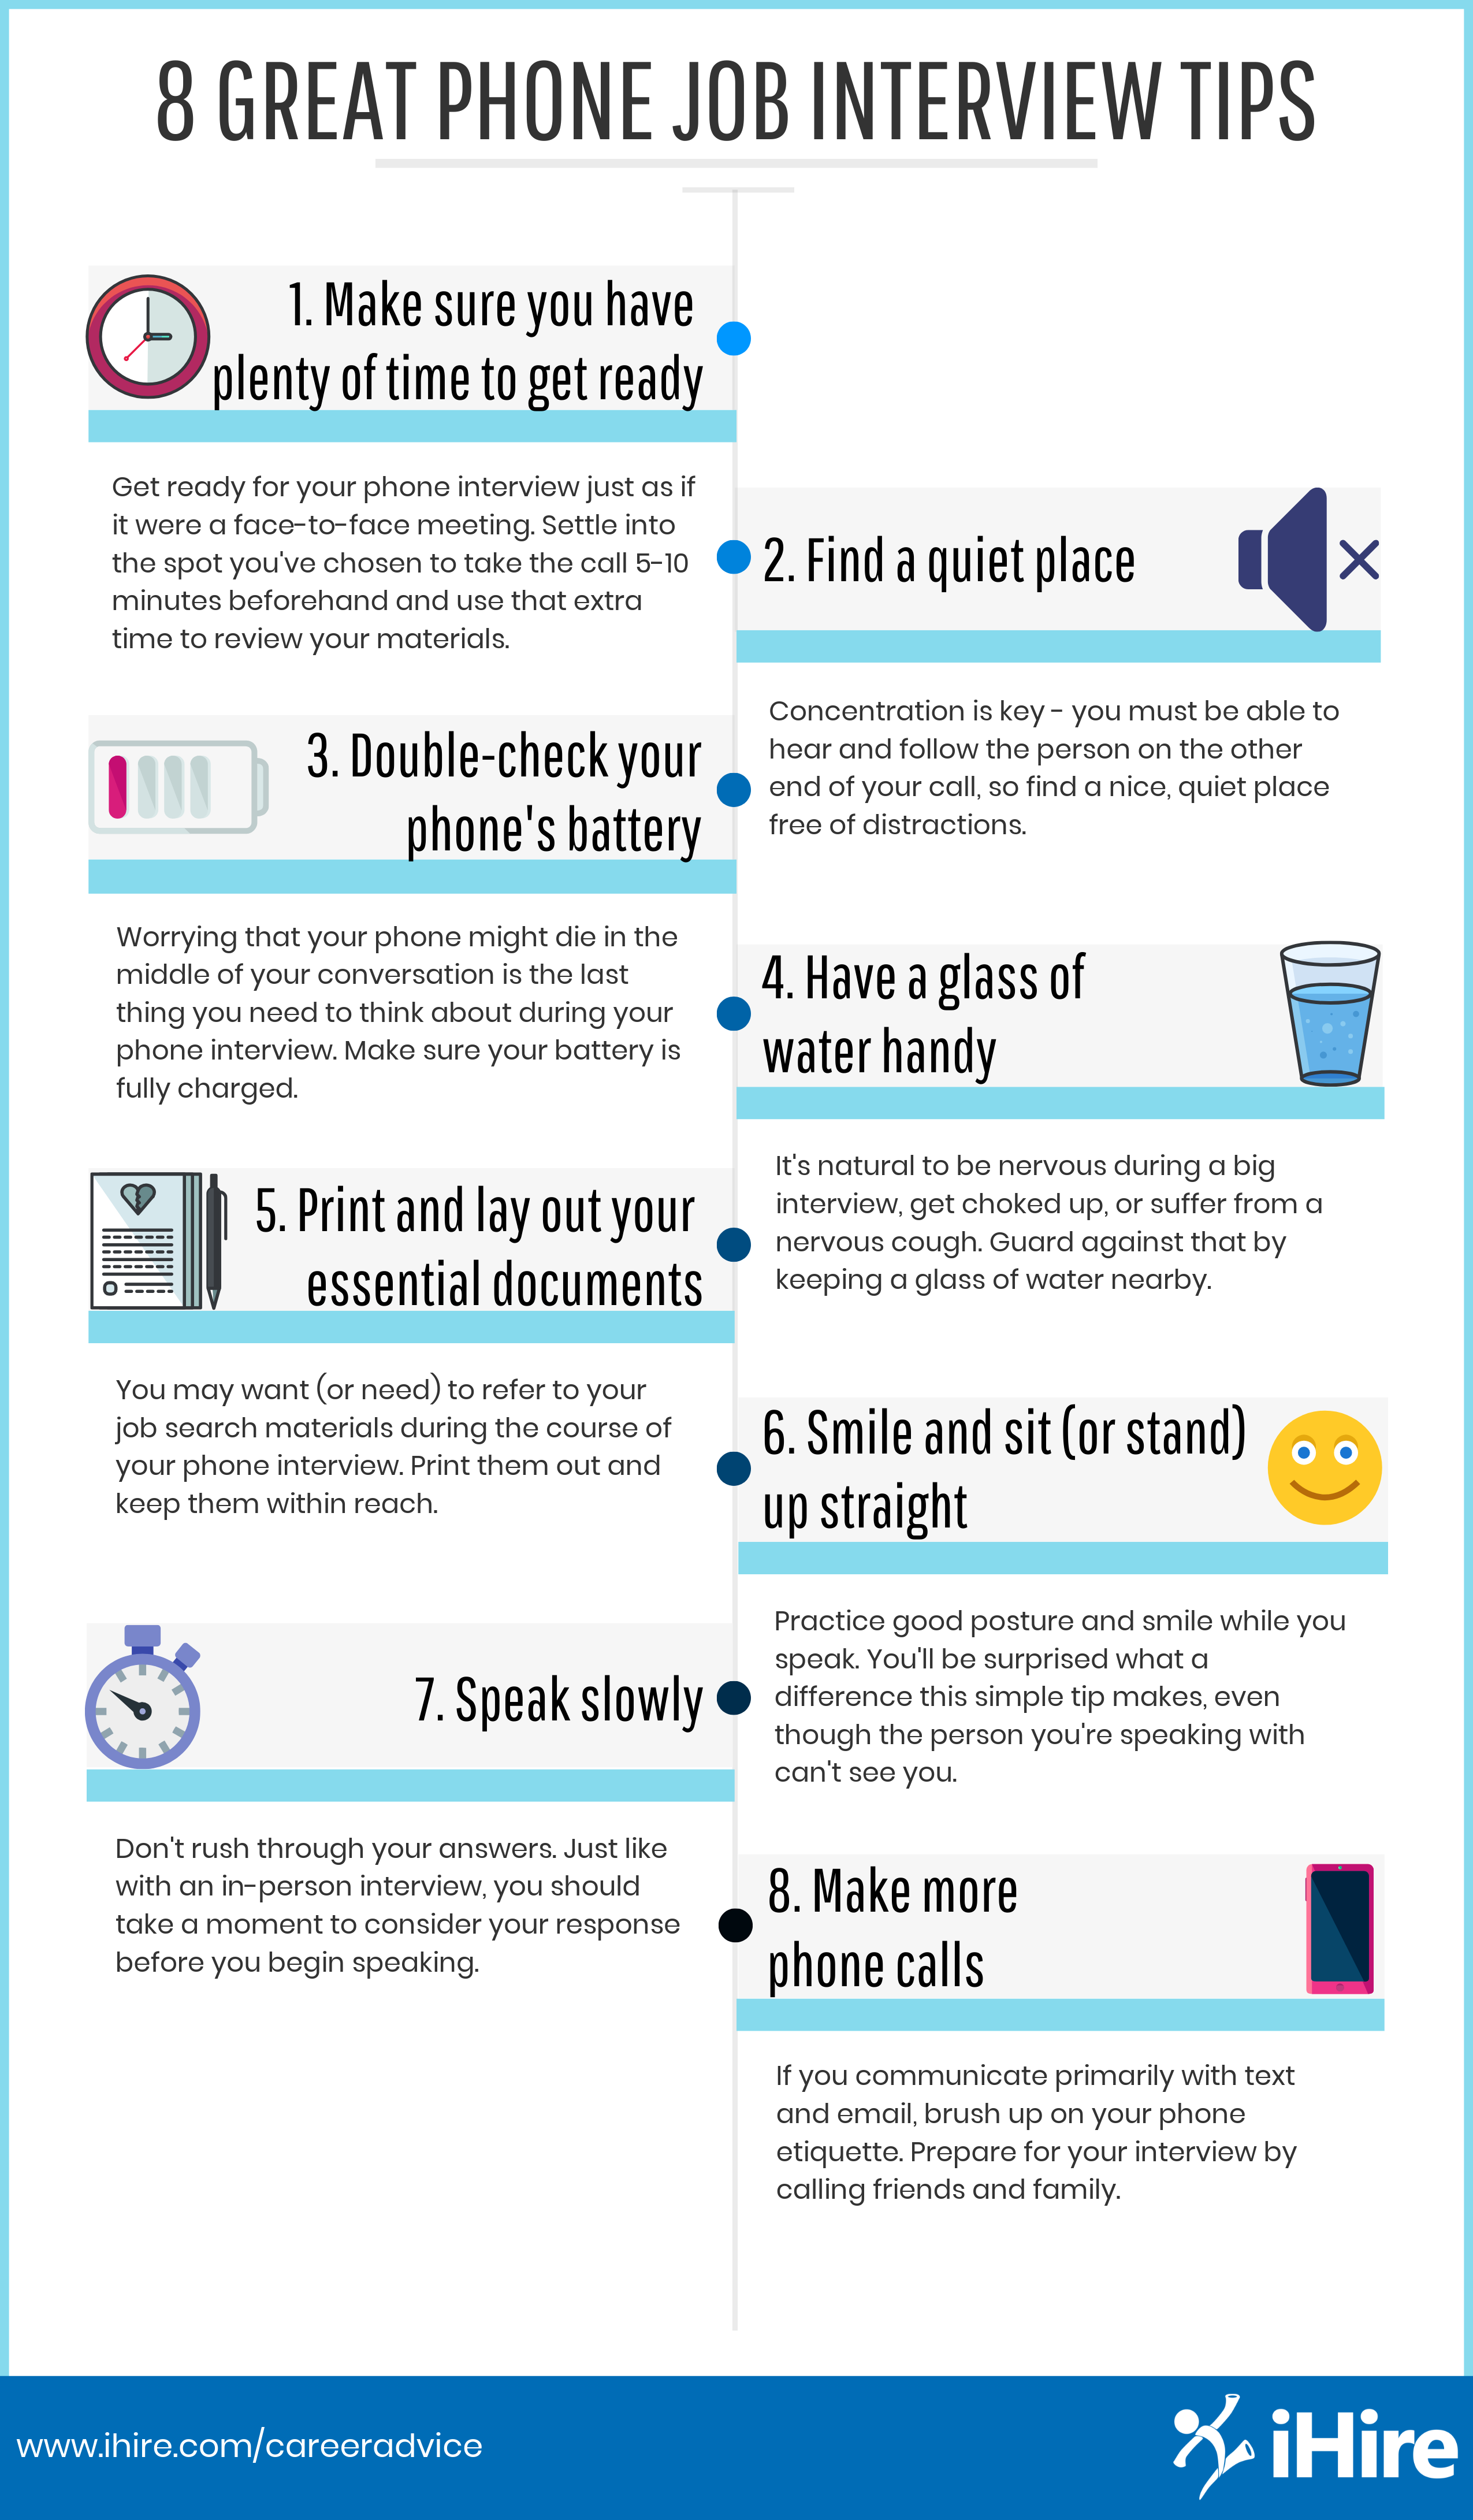 iHire's phone interview guide infographic with 8 great phone job interview tips